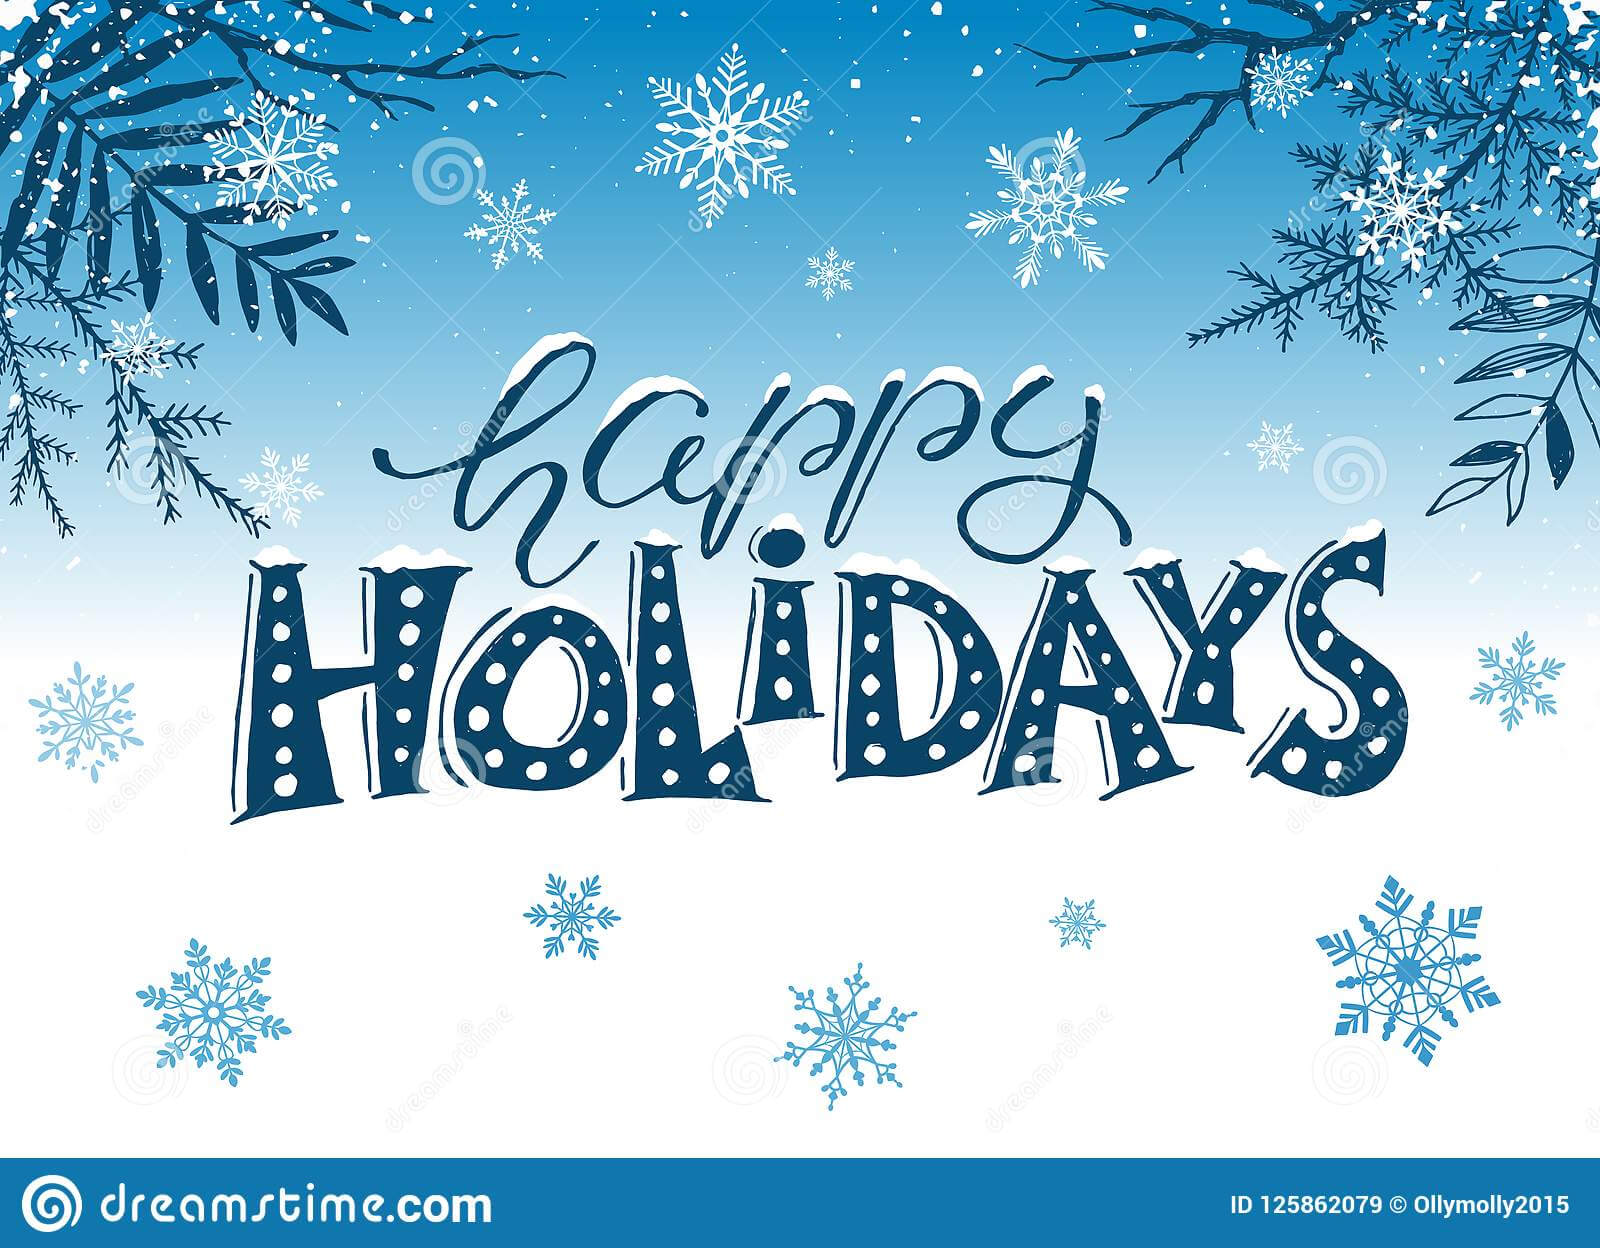 Happy Holidays Greeting Card Stock Vector Illustration Of Pertaining